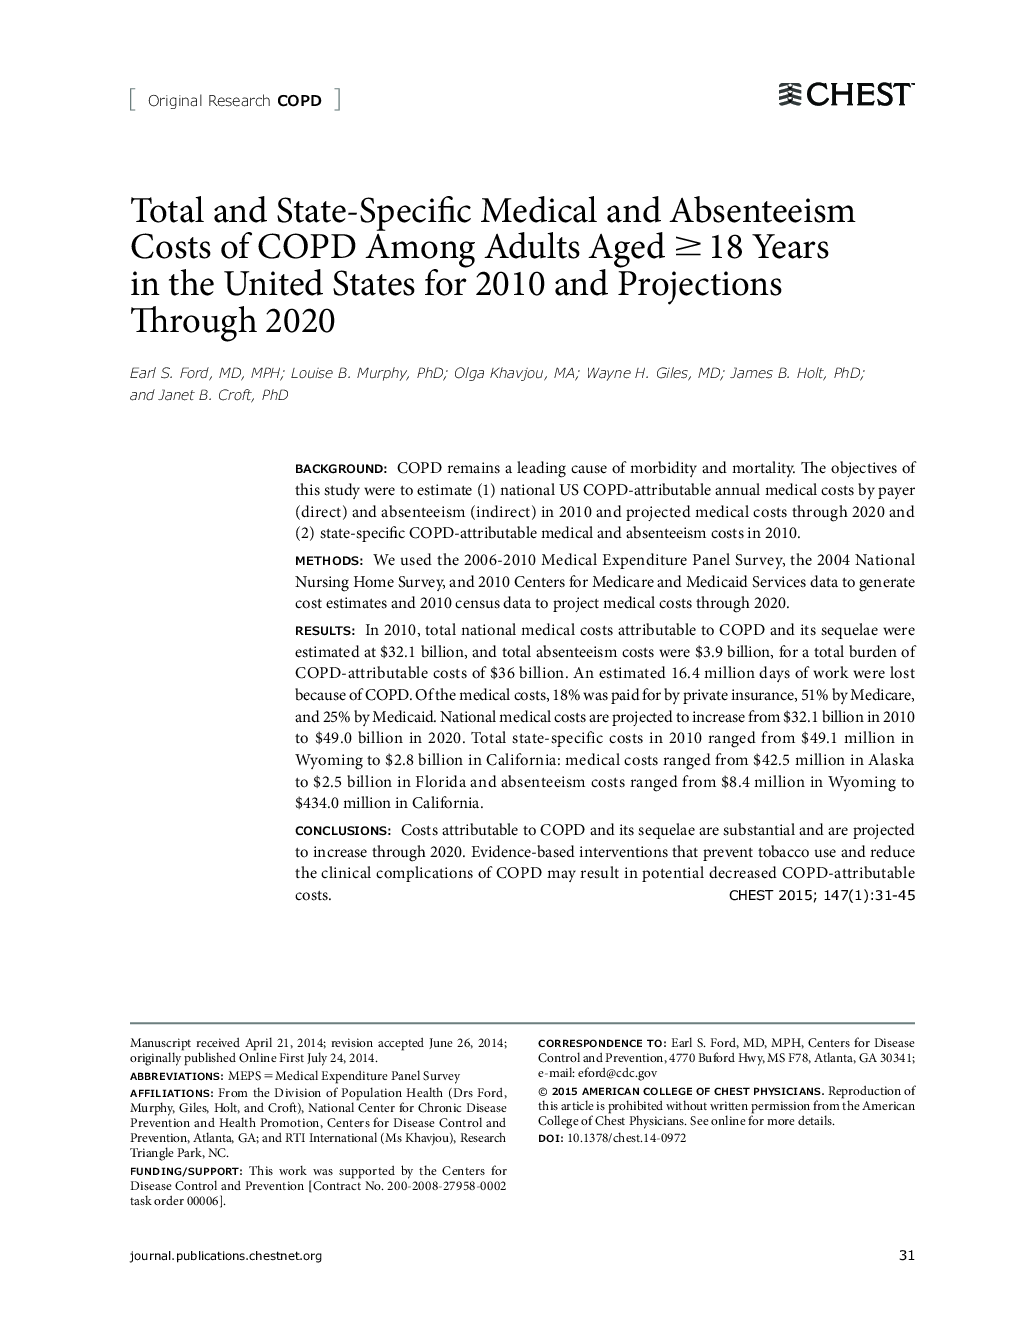 Total and State-Specific Medical and Absenteeism Costs of COPD Among Adults Aged 18 Years in the United States for 2010 and Projections Through 2020